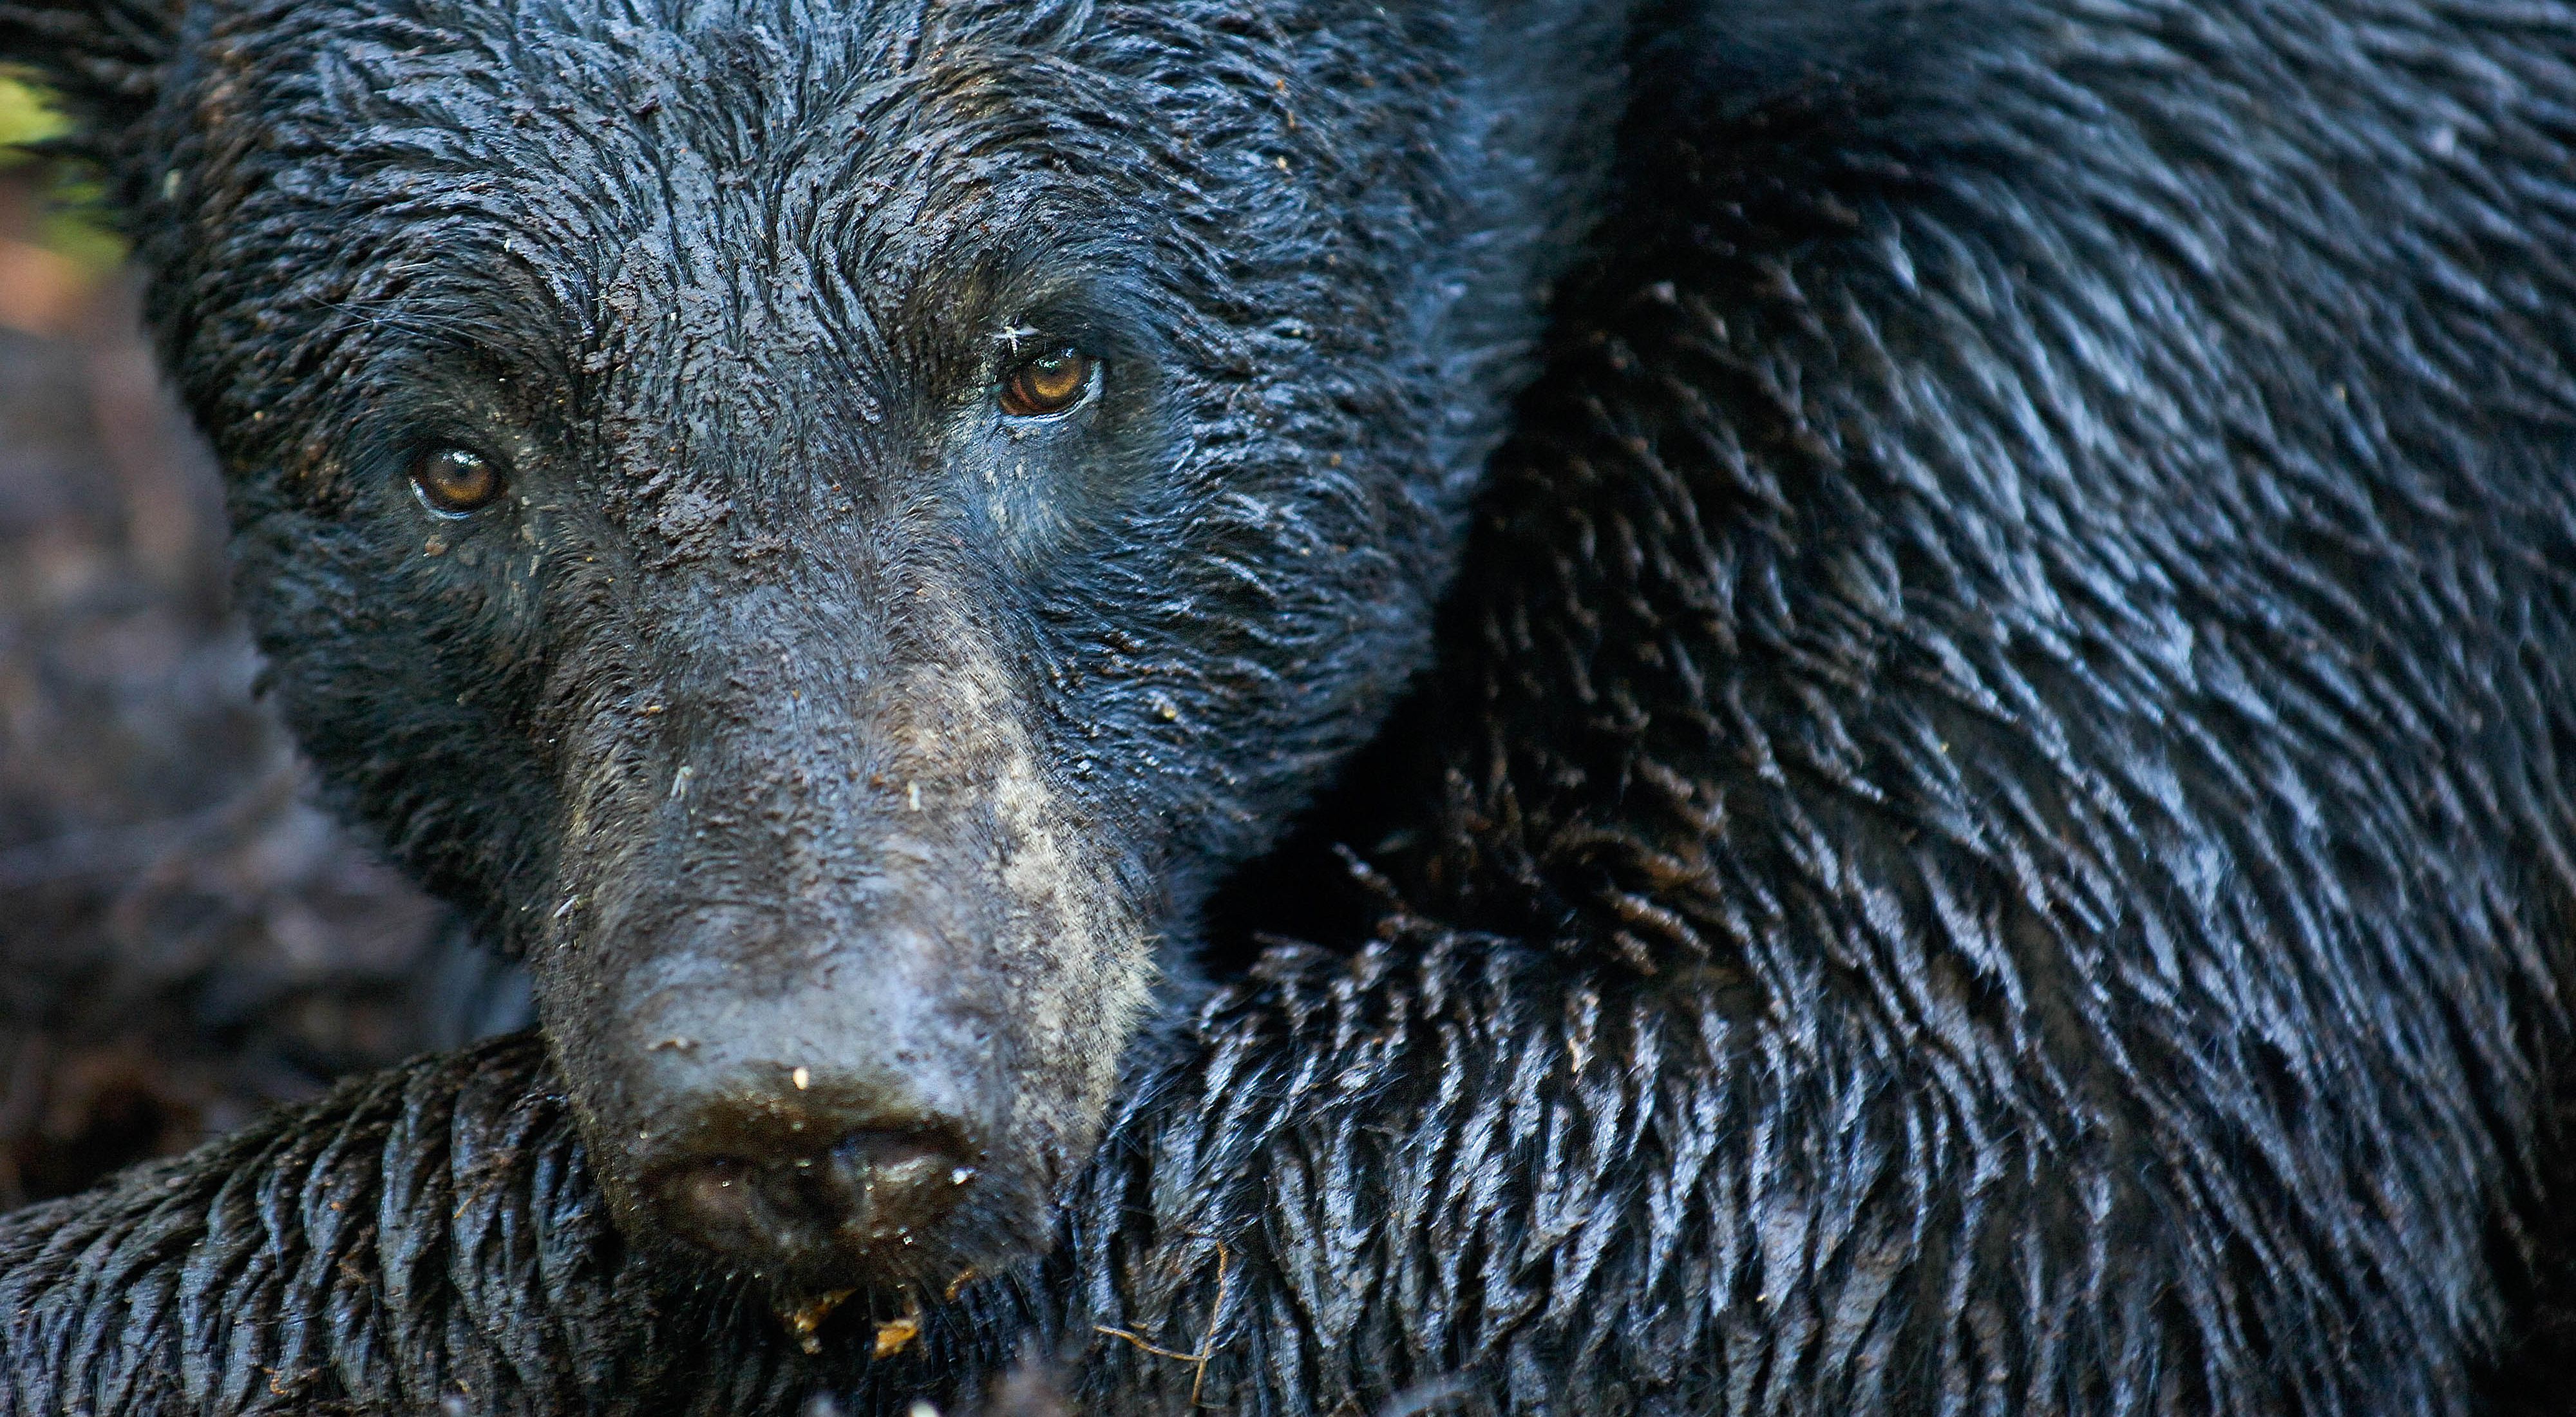 Closeup of the head and shoulder of a Florida black bear with wet, glistening fur.